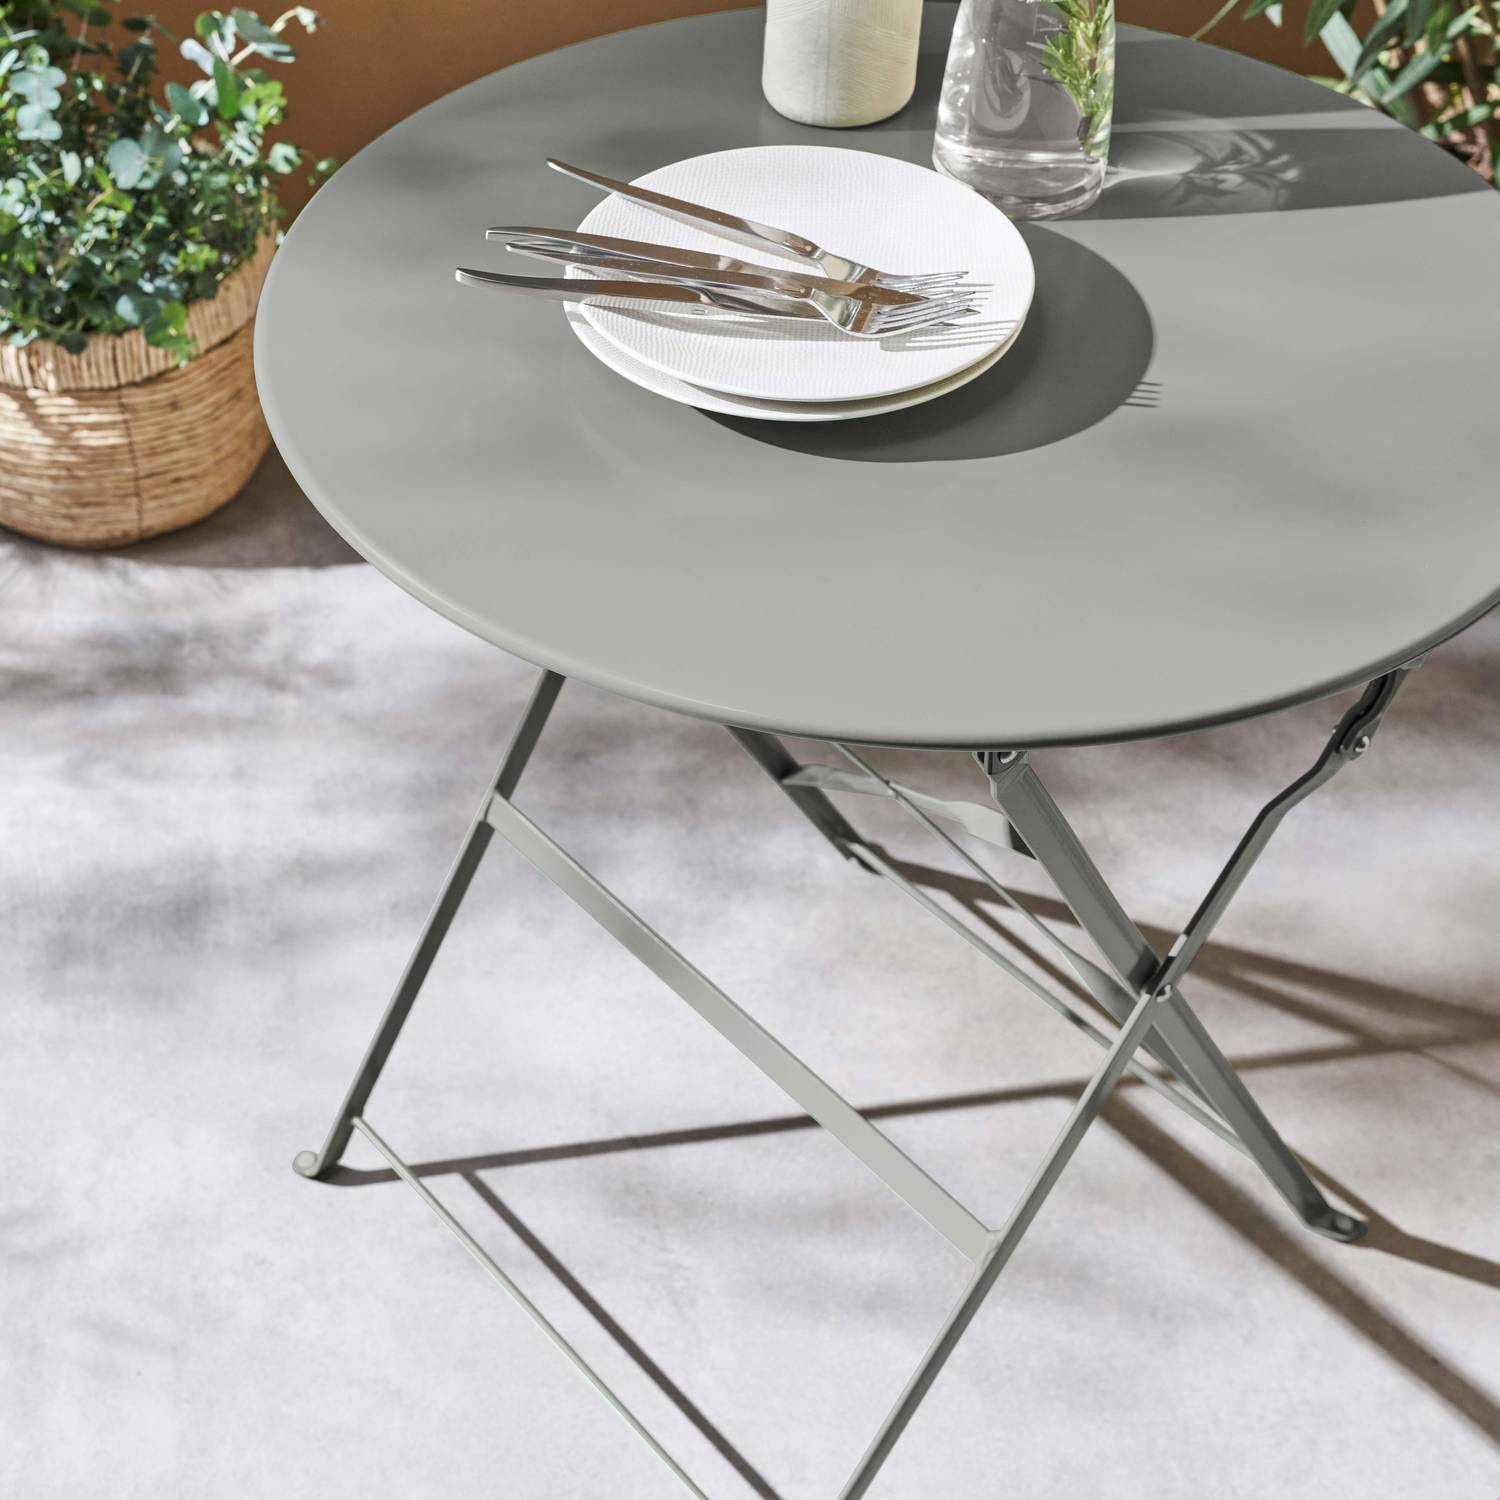 Foldable bistro garden table - Round Emilia taupe grey - Round table Ø60cm, thermo-lacquered steel Photo2